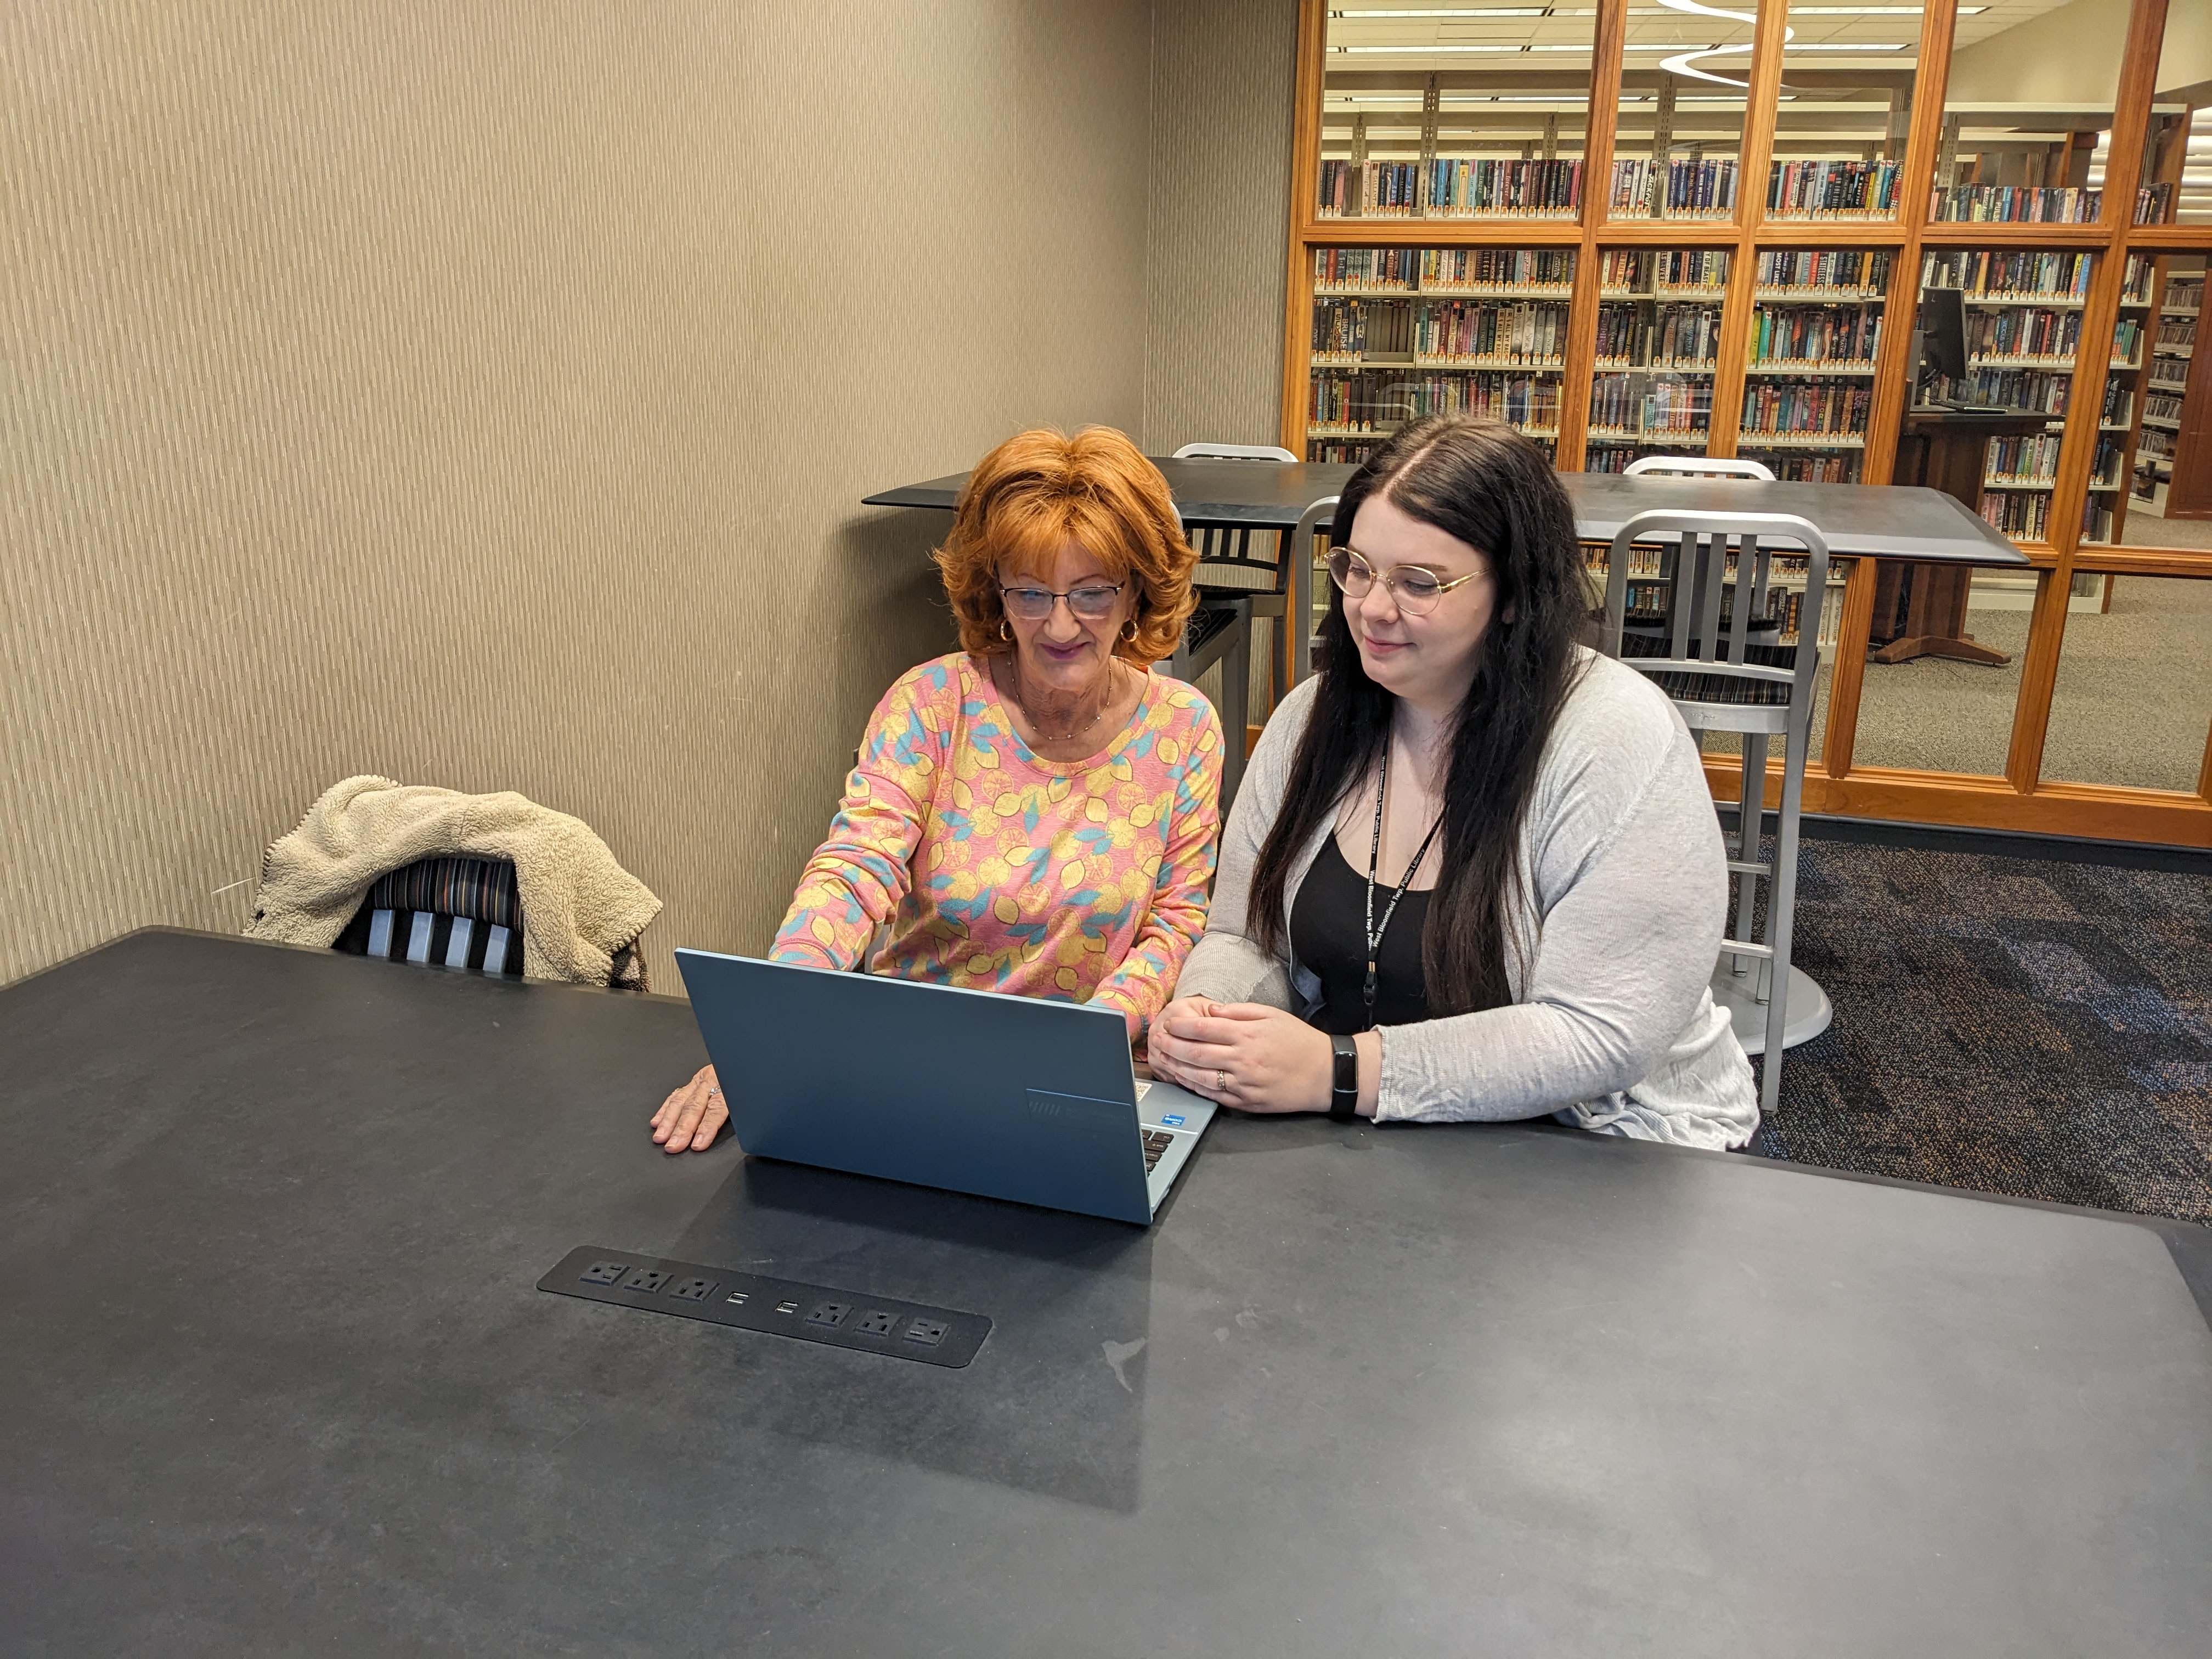 Two women look at a computer while seated at a table in the library